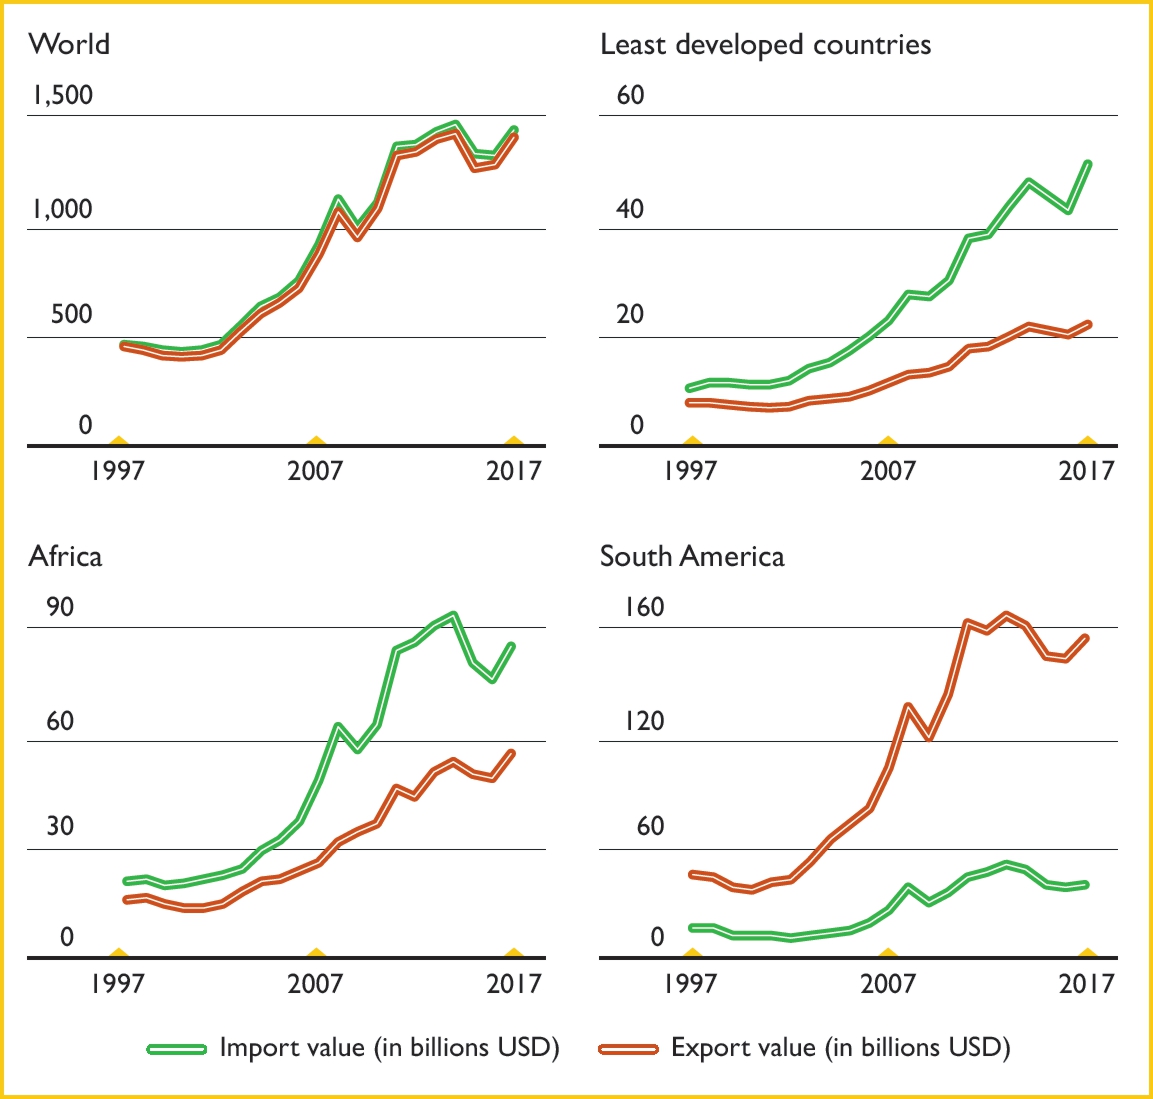 Value of agricultural imports and exports of all countries worldwide combined, of the world’s currently 47 least developed countries (LDCs), Africa and South America from 1997 to 2017 in billion US dollars